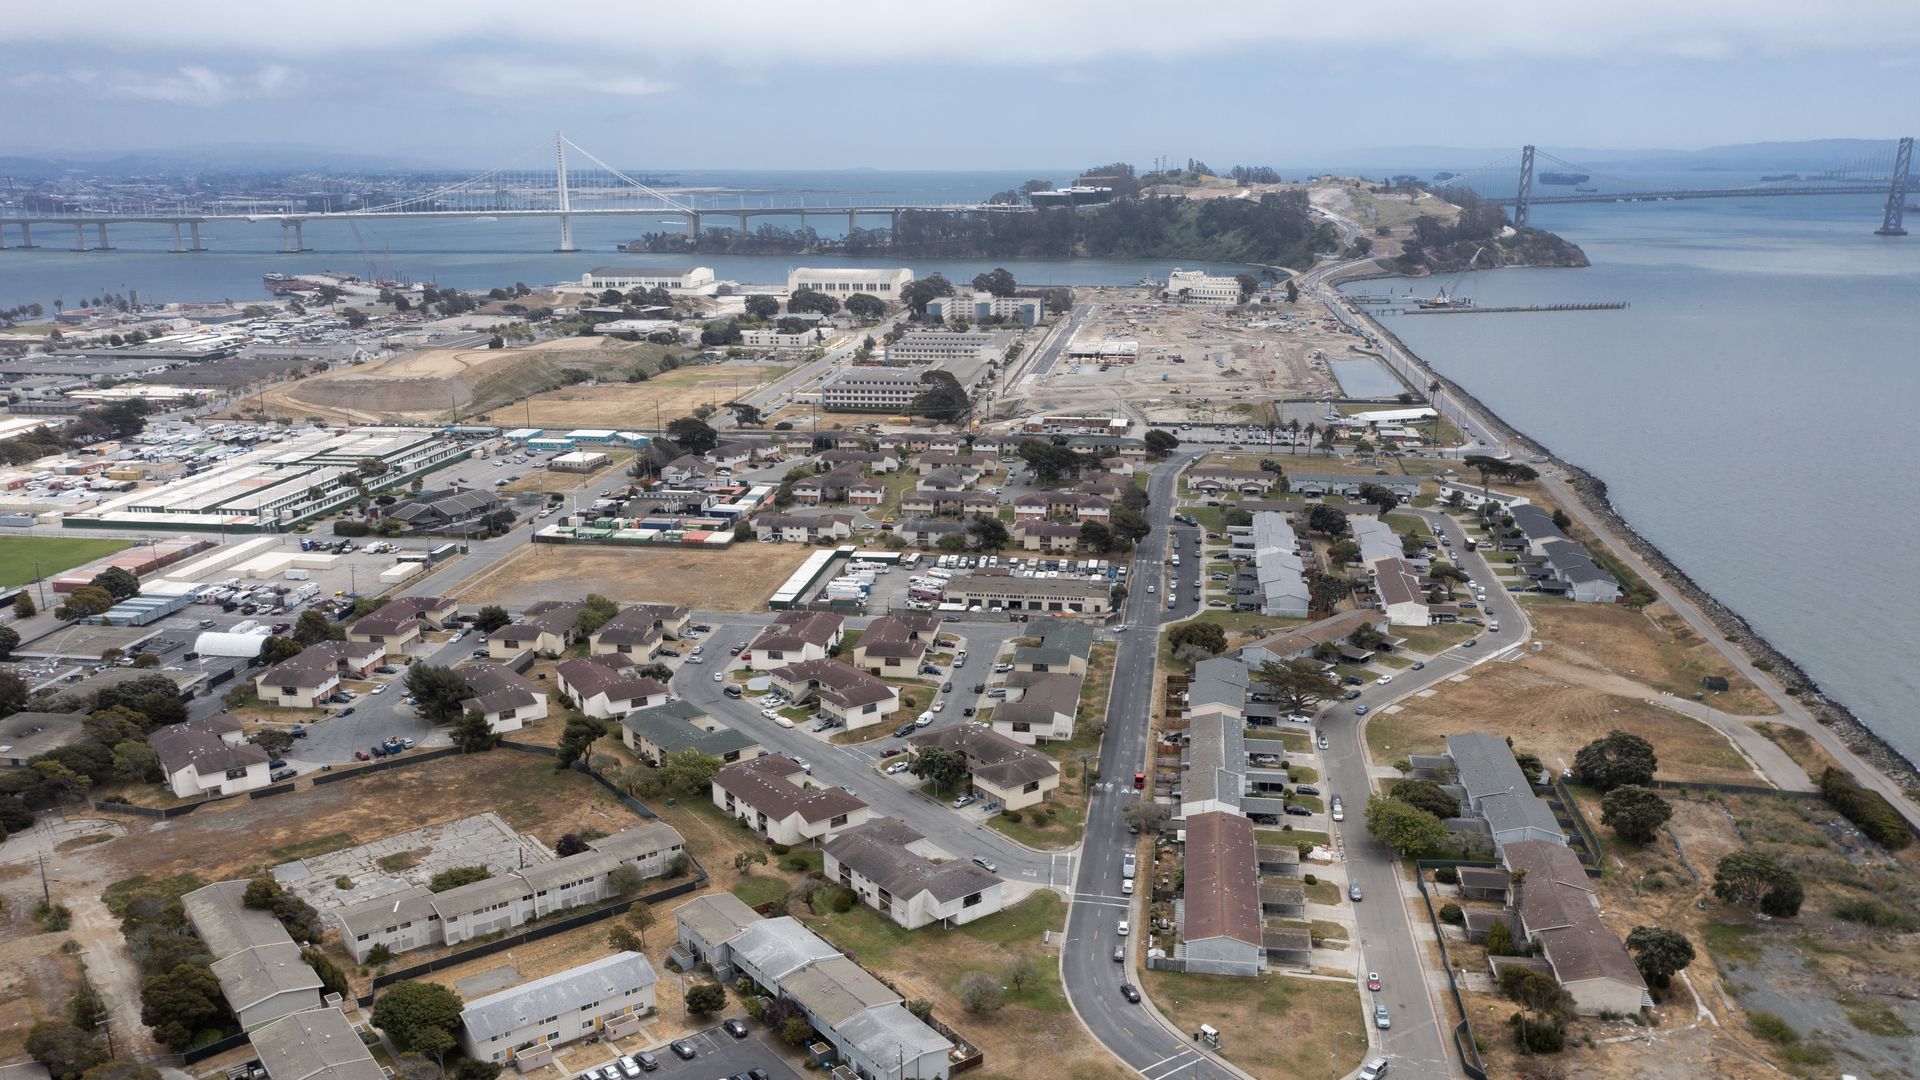 Aerial view of Treasure Island's landscape, including roads and buildings